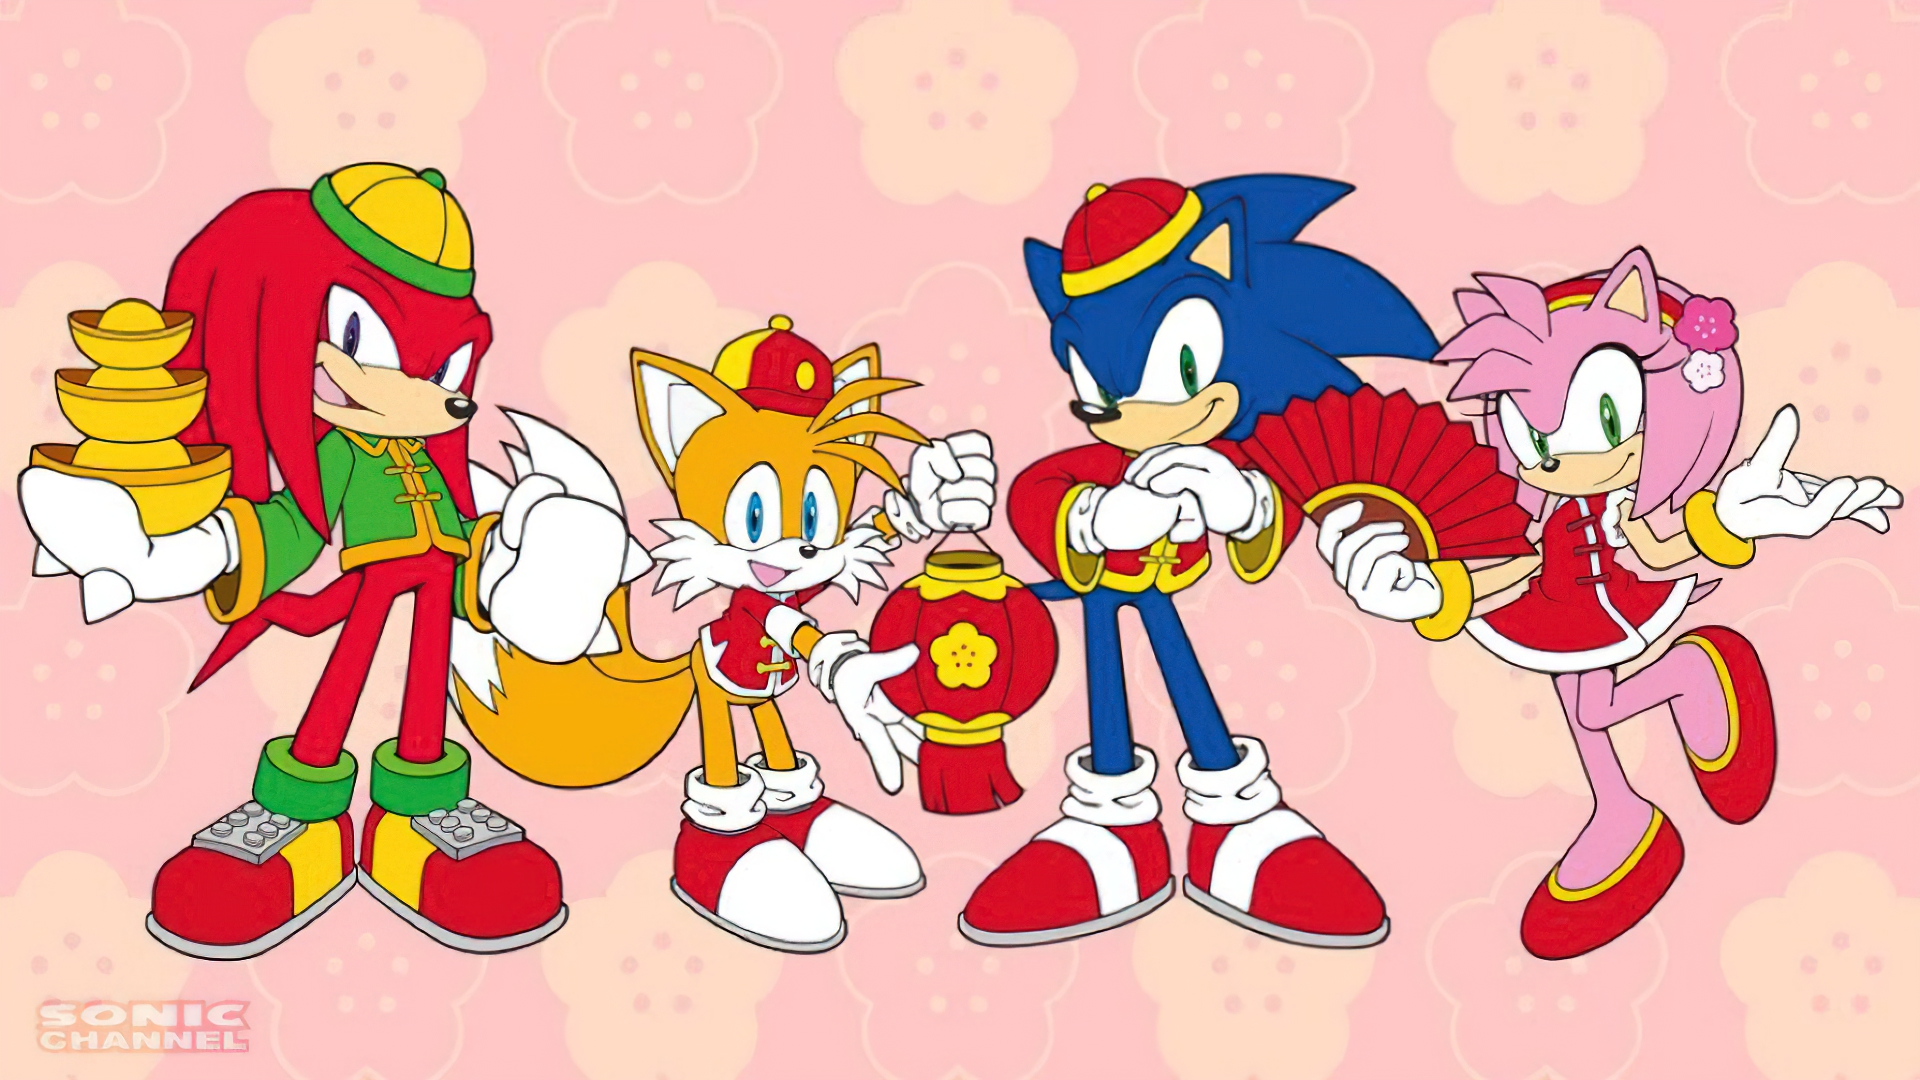 General 1920x1080 Sonic Tails (character) Amy Rose Knuckles Sonic the Hedgehog Spring Festival video game art Sega New Year PC gaming holiday fox Anthro artwork pink background video games